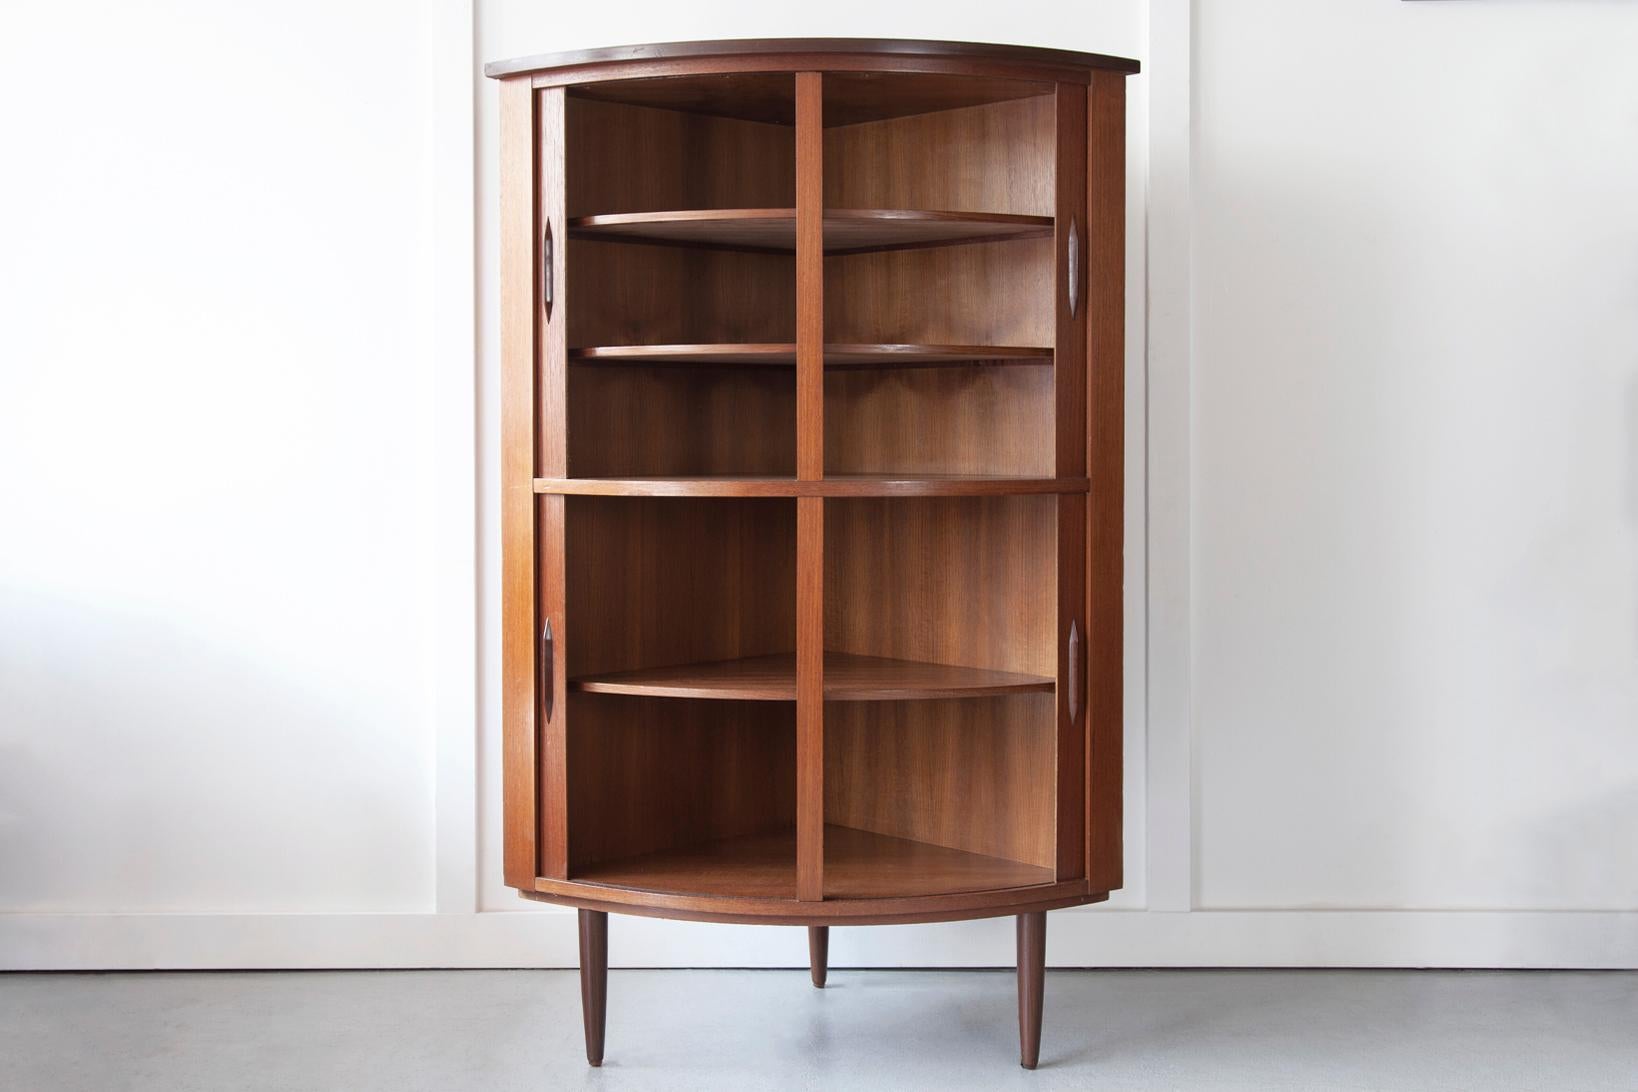 A beautiful and unique Danish teak corner cabinet with stunning tambour doors, curved pulls and internal shelves, produced by Skovmand & Andersen in the 1960s. The upper section has smaller shelf height, perfect for storing glasses whereas the lower